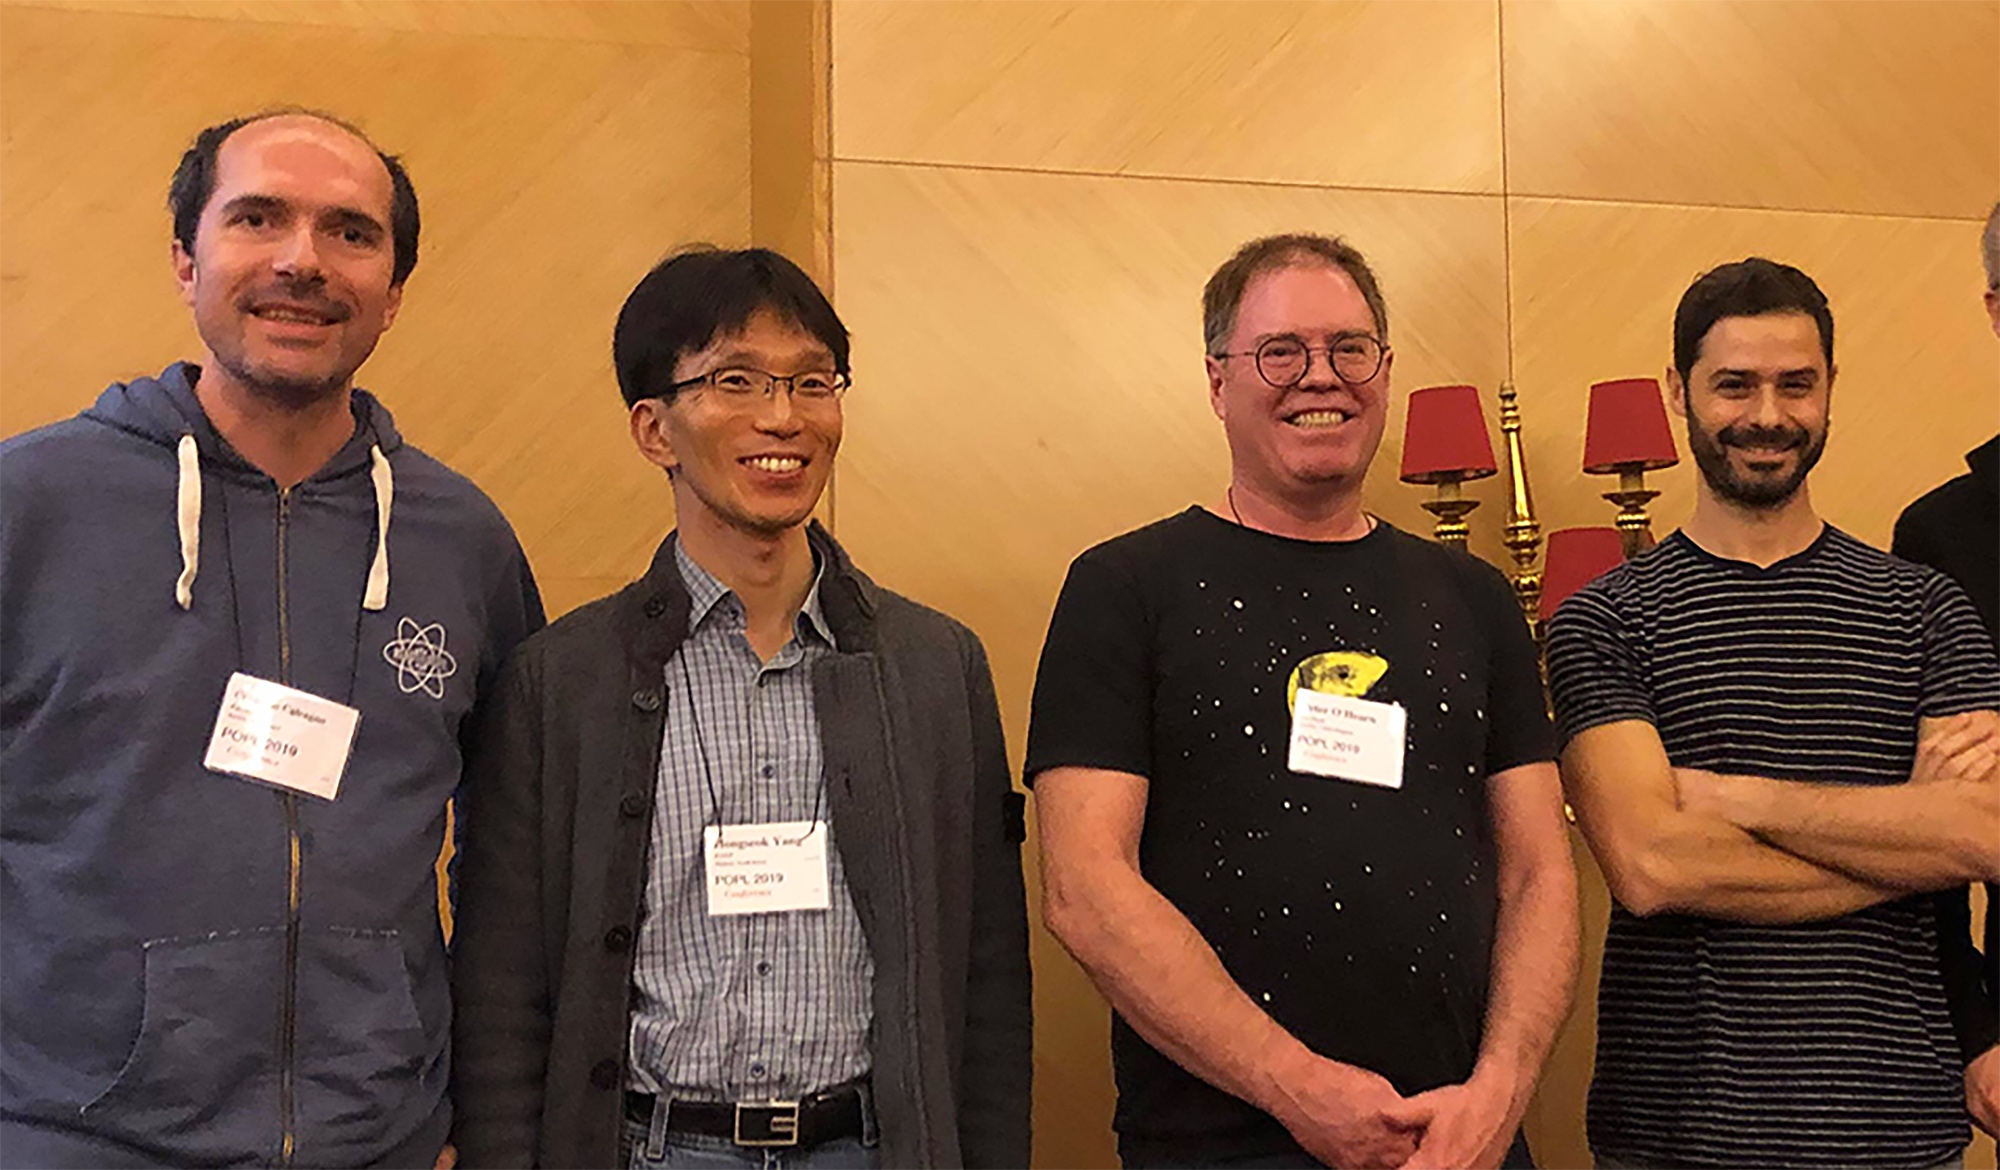 The team behind Infer: Facebook researchers Cristiano Calcagno, Dino Distefano, and Peter W. O’Hearn and Hongseok Yang of KAIST win Most Influential POPL Paper Award at ACM SIGPLAN 2019.